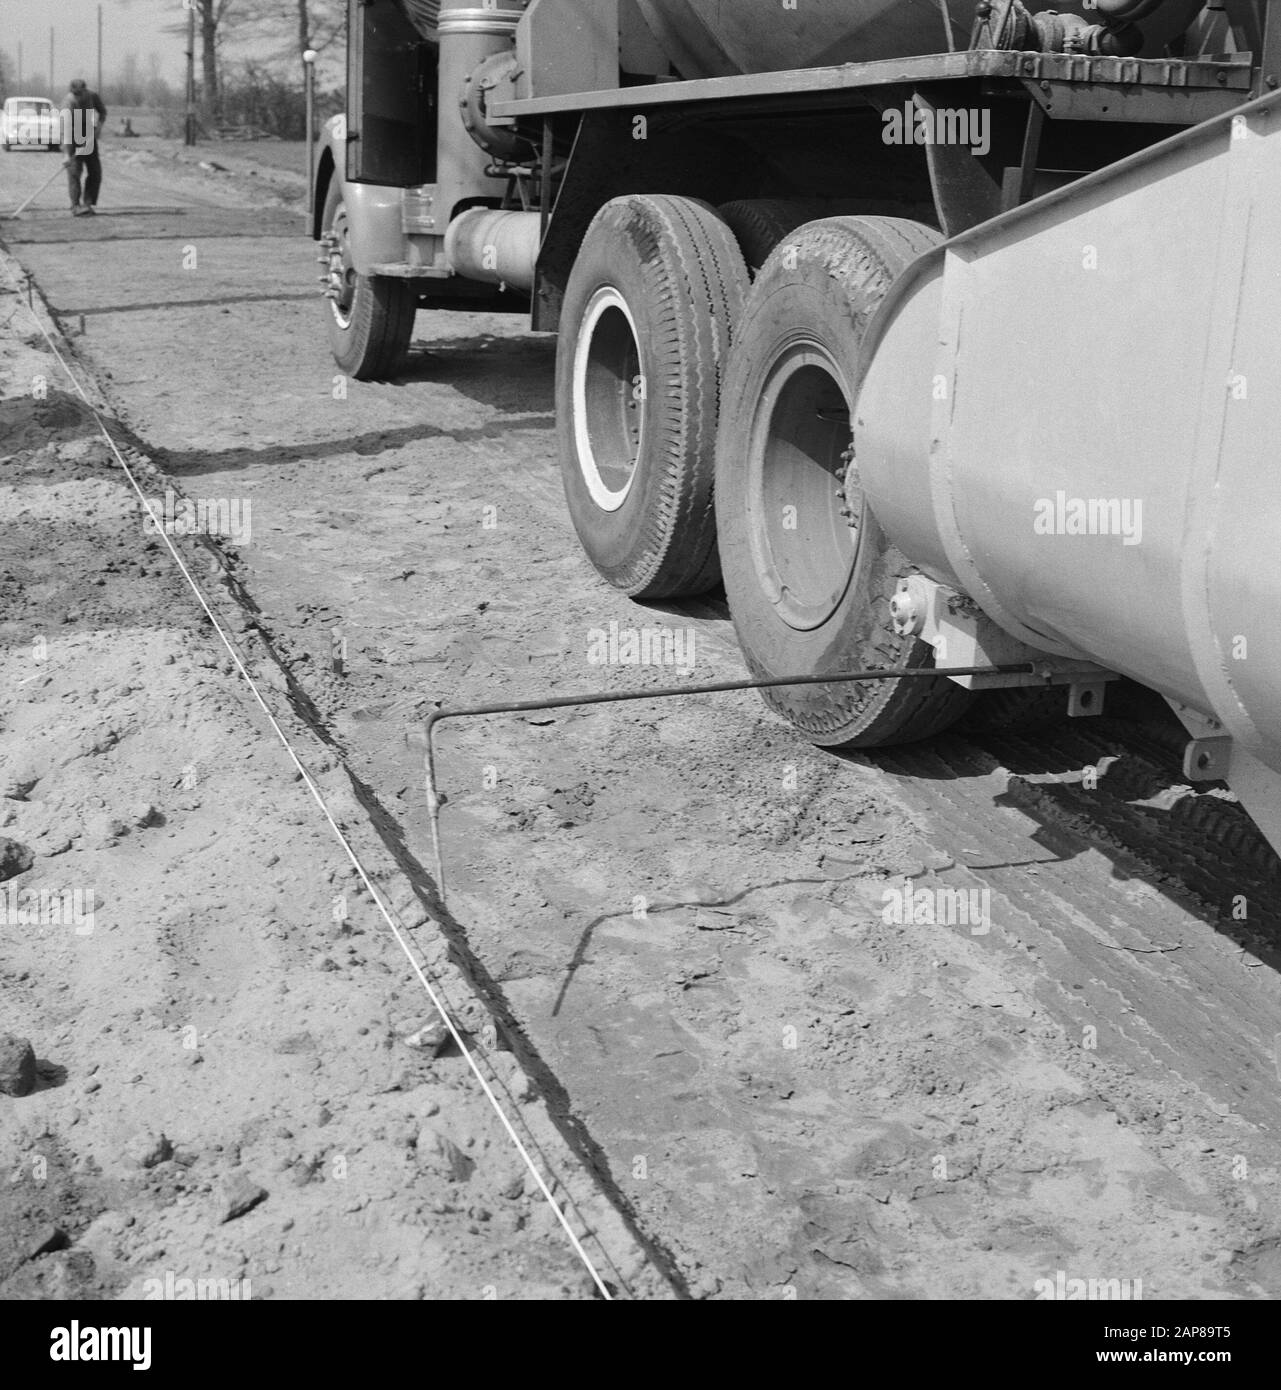 construction and improvement of roads, dikes and savings basins, construction concrete road, concrete road machines, controllers, wires, dorther and oxerweg Date: May 1964 Location: Gorssel Keywords: construction of concrete road, construction and improvement of roads, control systems, concrete road machines, dikes and savings basins, wires Person name: dorther en oxerweg Stock Photo